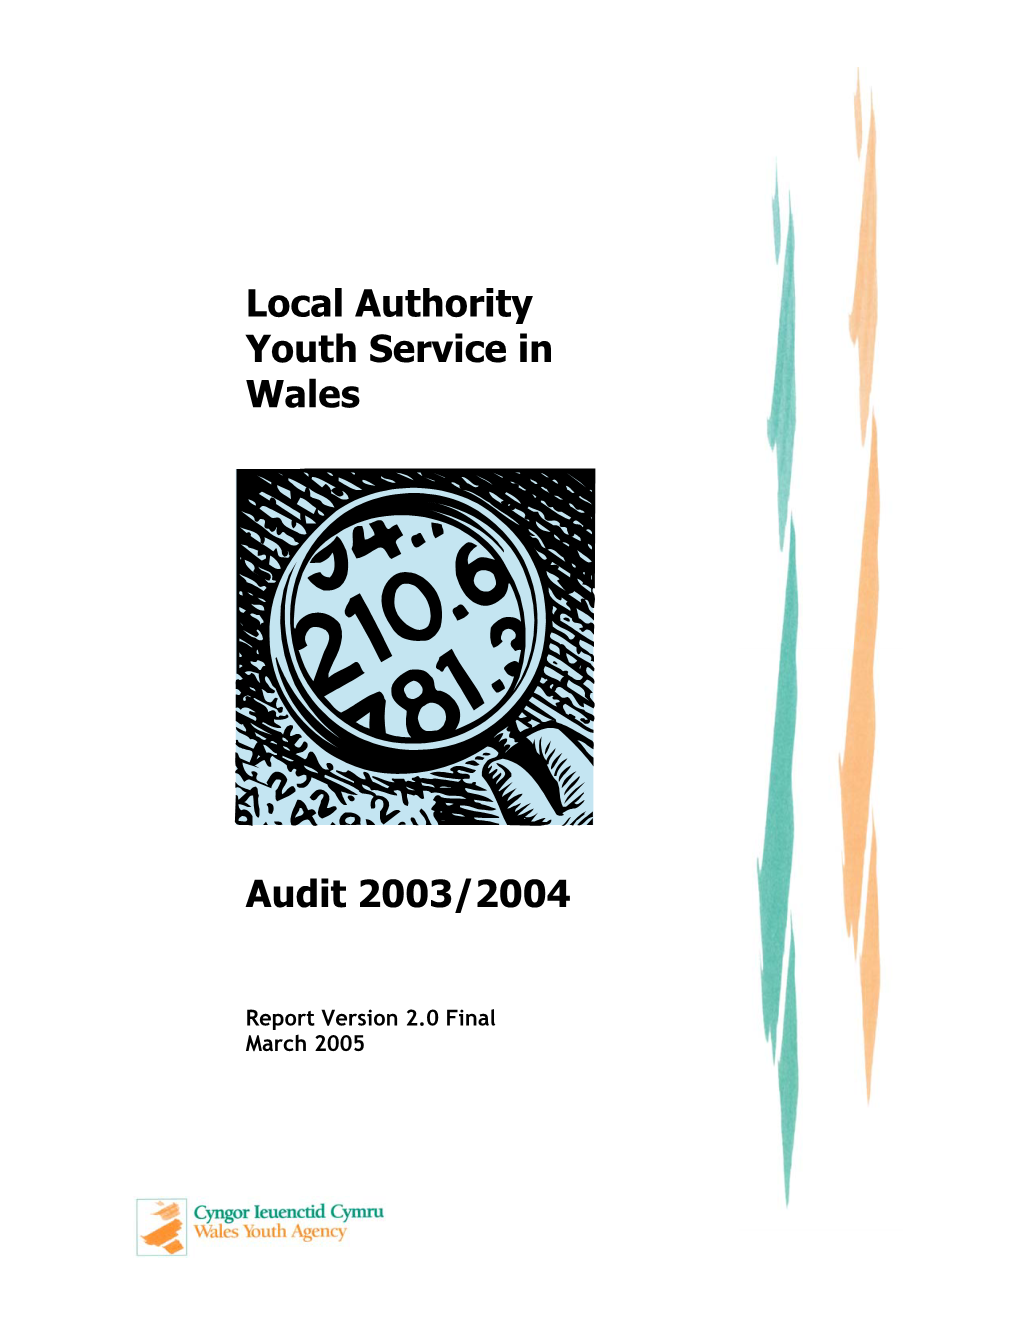 Local Authority Youth Service in Wales Audit 2003/2004